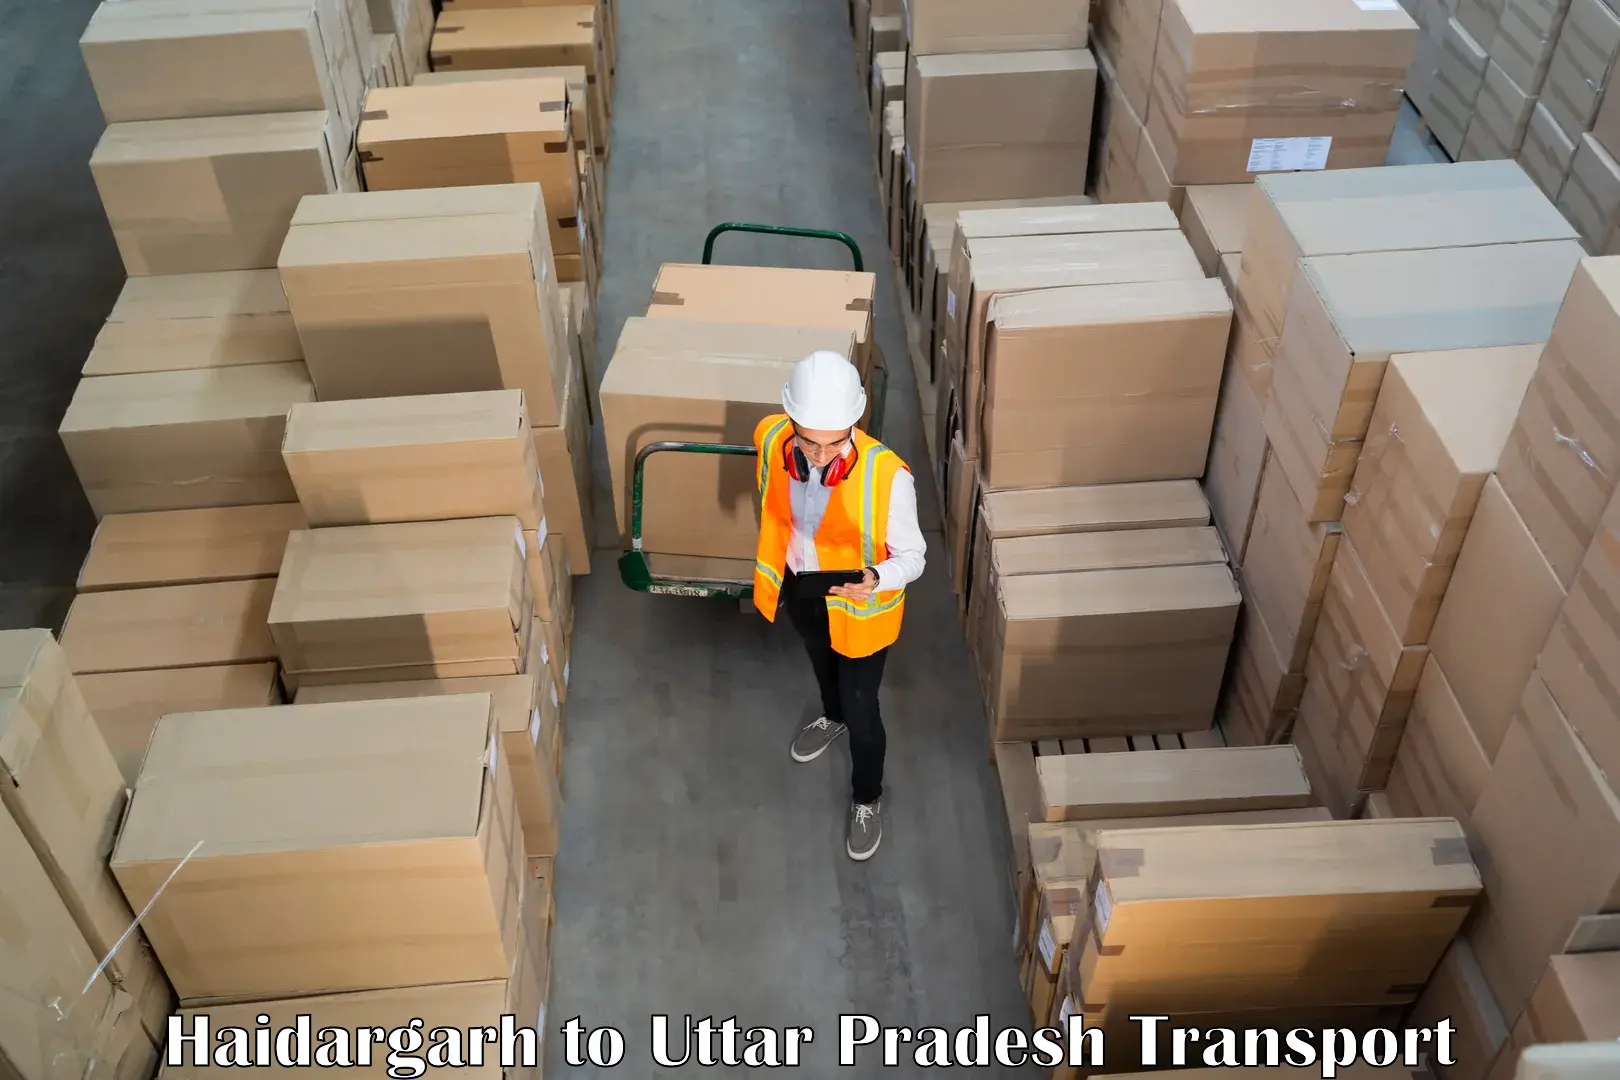 Road transport online services Haidargarh to Saharanpur